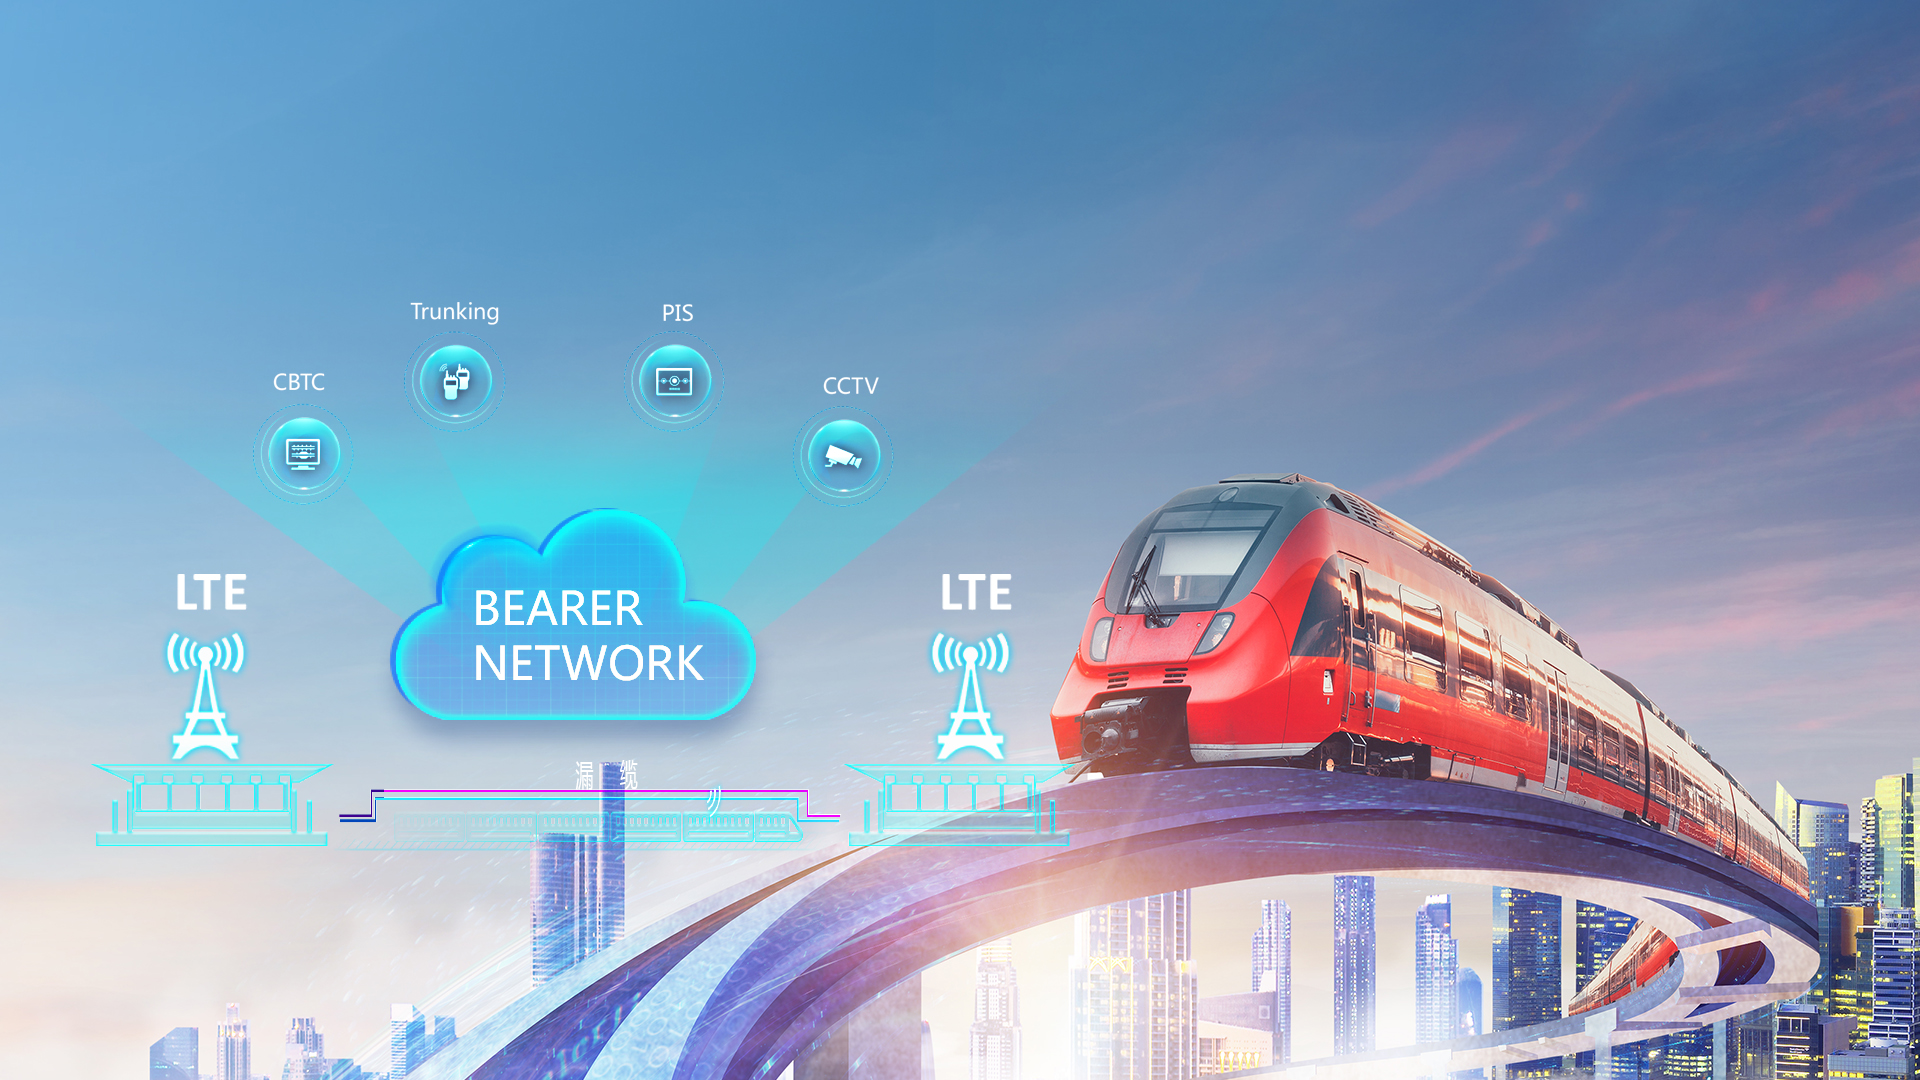 An illustration of the Long Term Evolution (LTE) for Metro Testbed, led by Huawei and its partners, announced by IIC in 2020